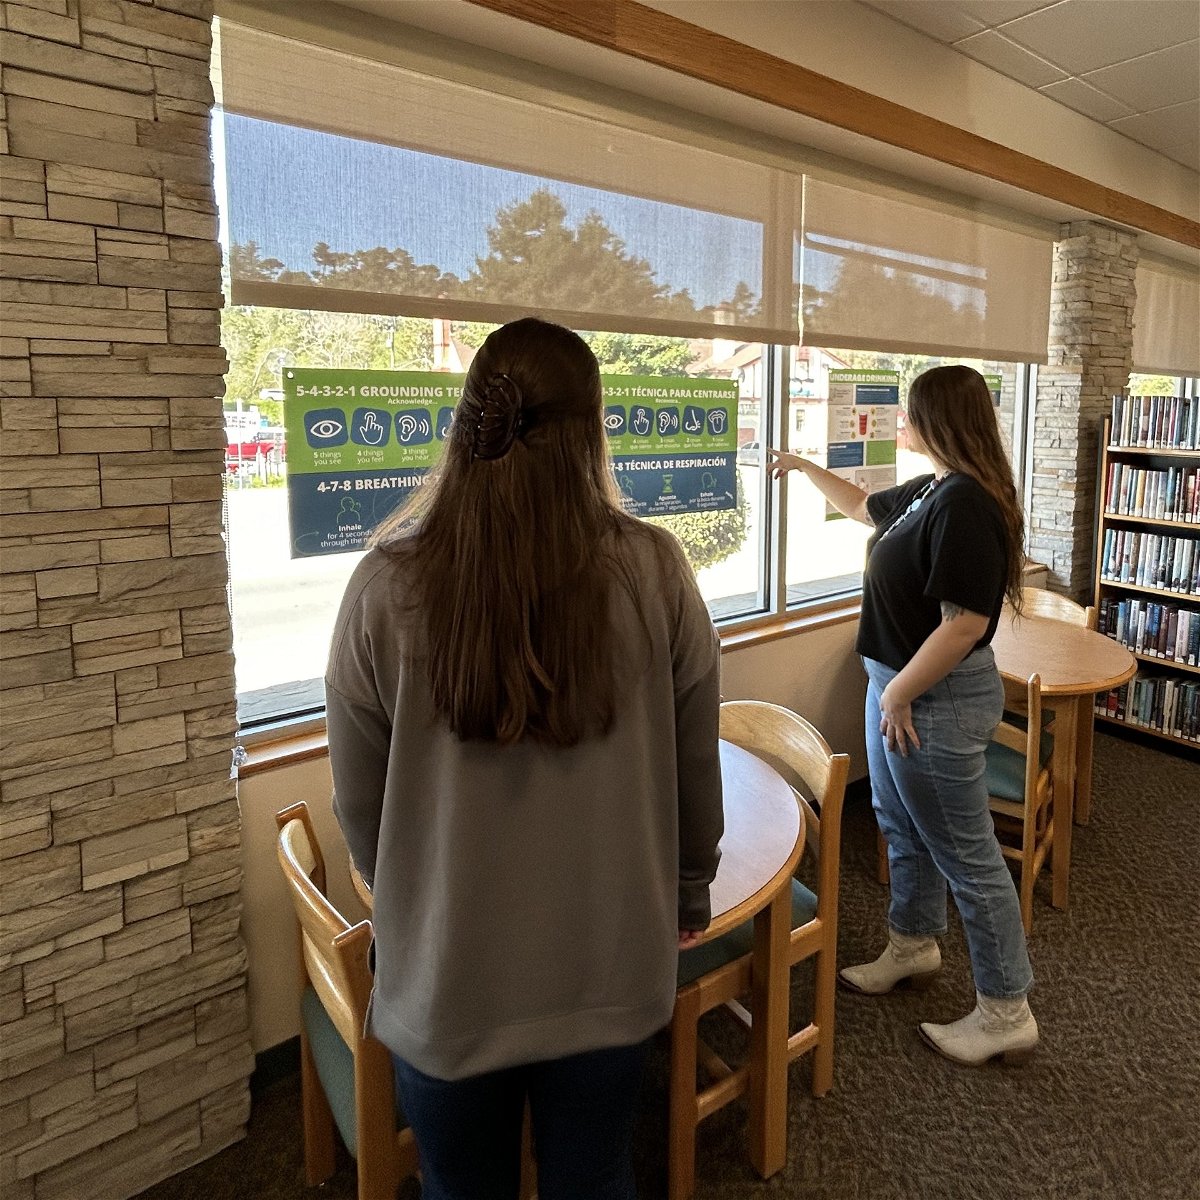 Partnership Between San Luis Obispo County Behavioral Health Department and County Libraries Extended Through April